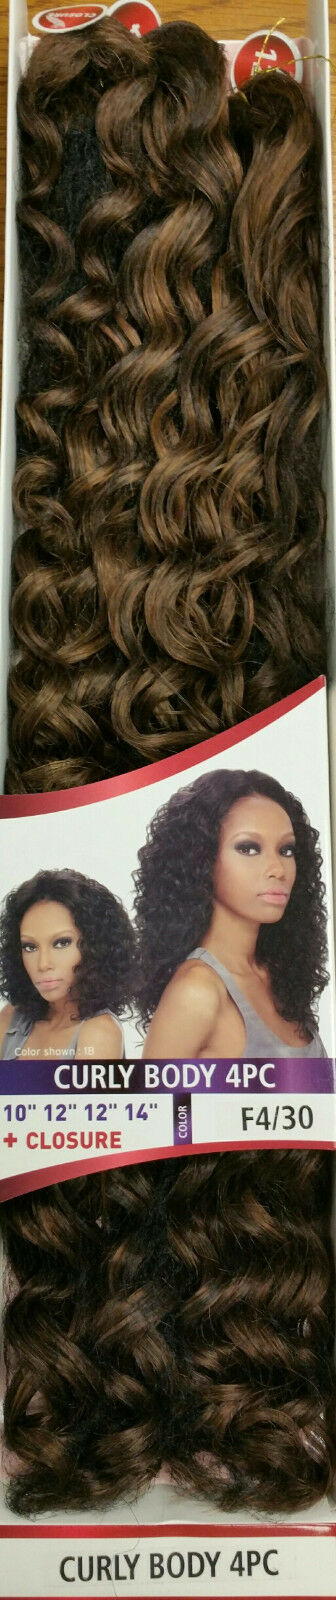 Outre SOL All 4 One  Human Hair Premium Mix CURLY BODY WVG